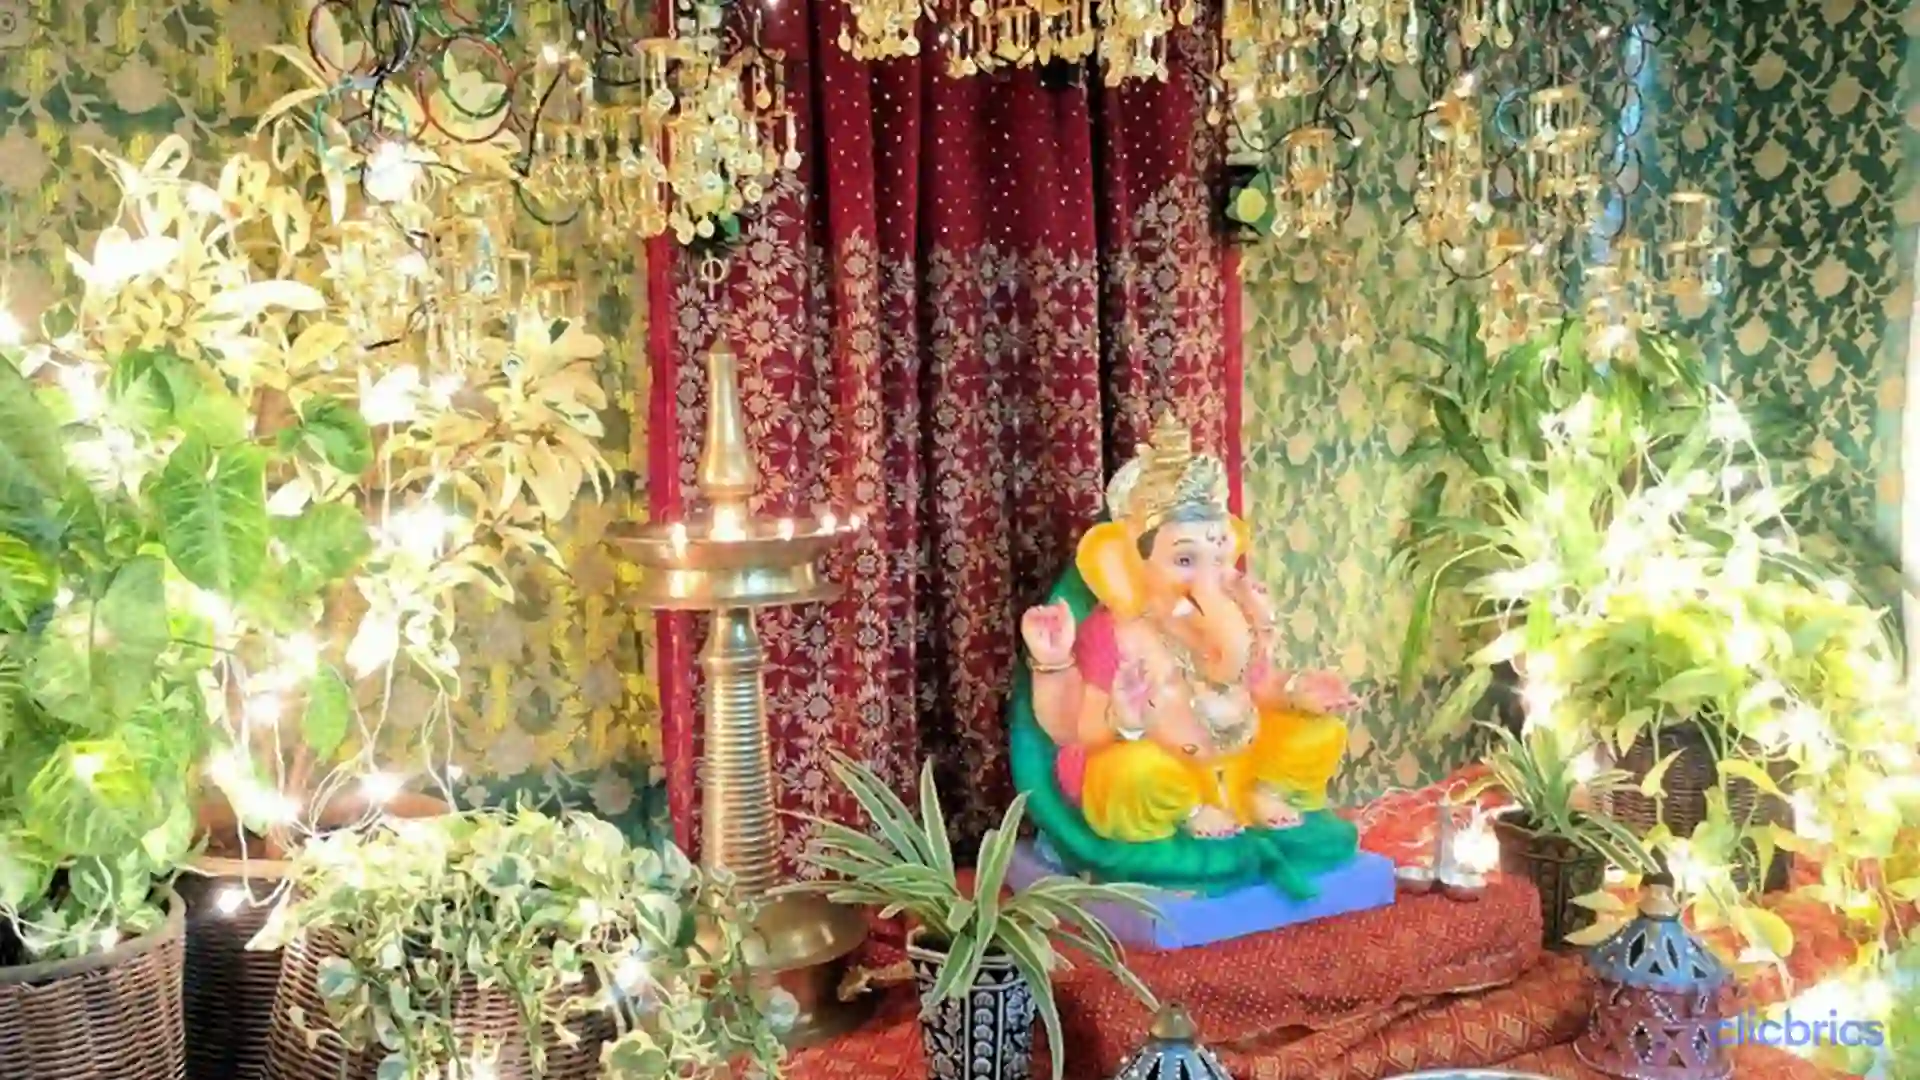 Ganpati Decoration at Home in 2022 - (15 Ideas with Images)